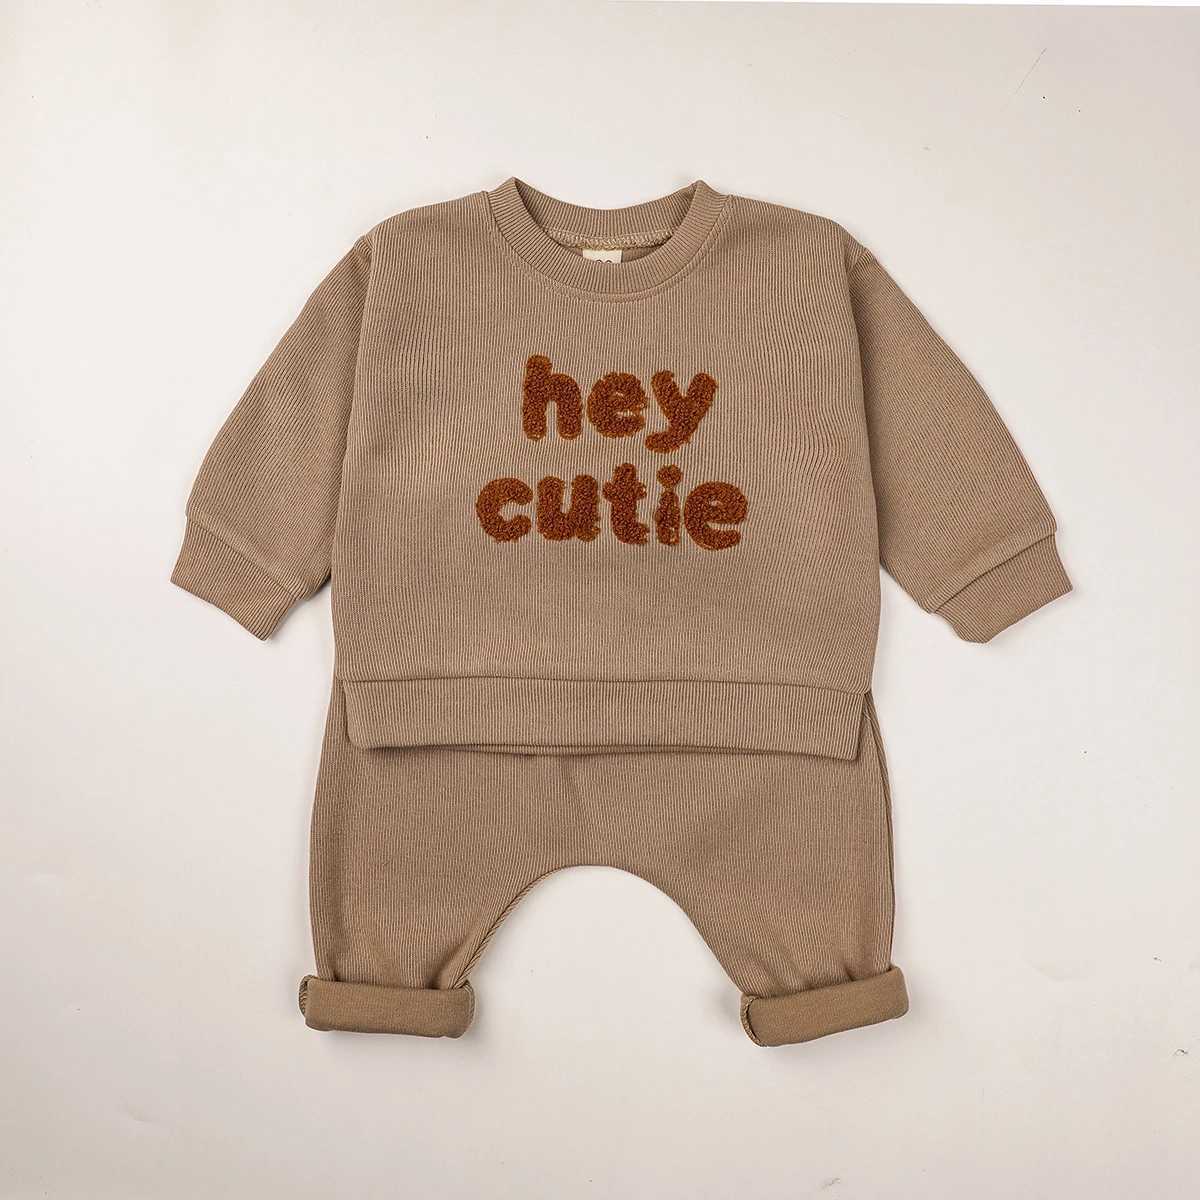 T-shirts 0-3Y Baby Boy Girl Clothes Set Newborn Infant Outfits Waffle Rainbow Tops Pants Casual Clothing Autumn SpringL2404